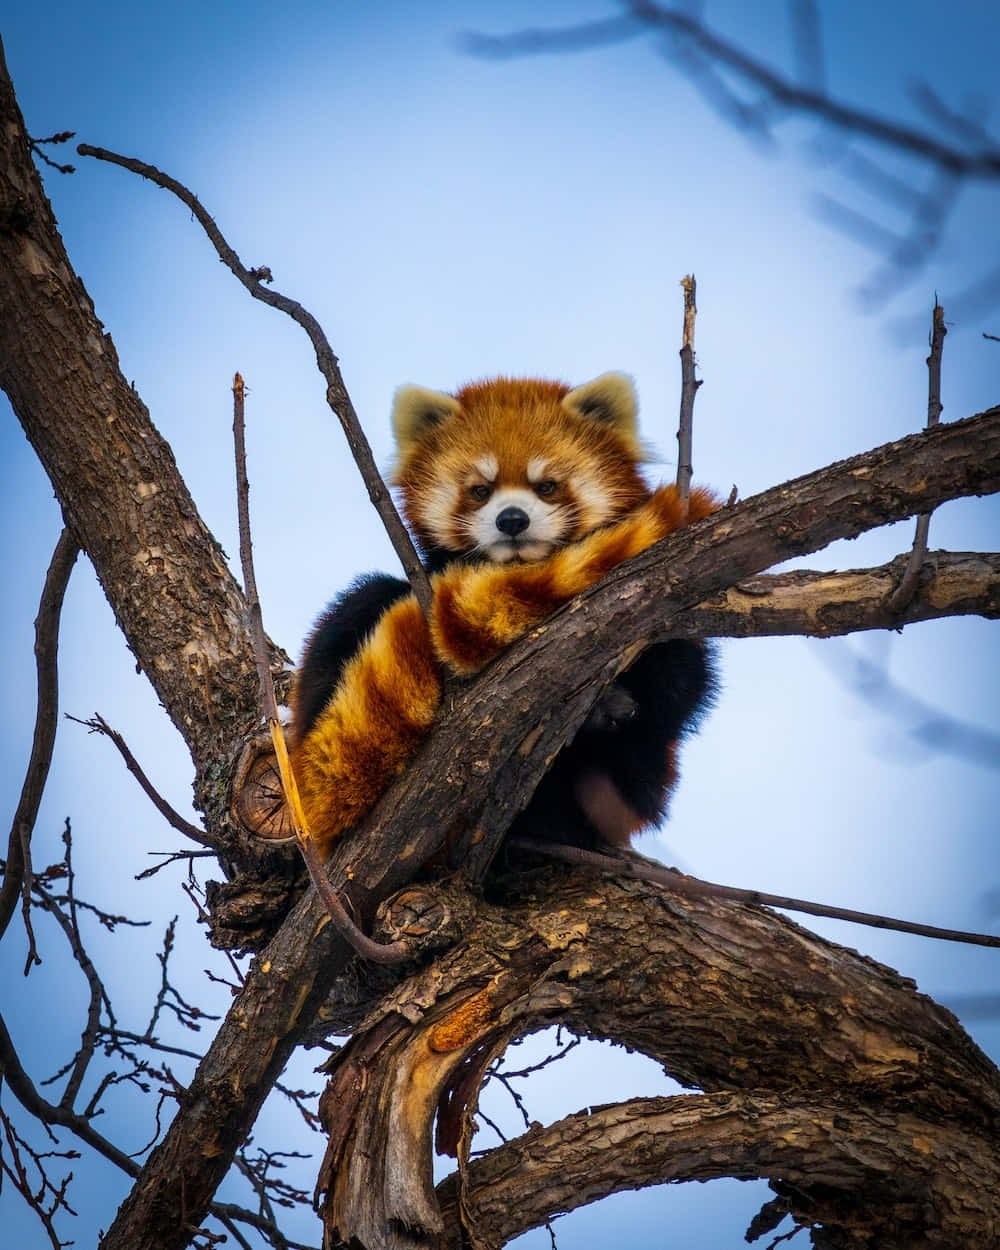 Adorable Red Panda curled up in a tree